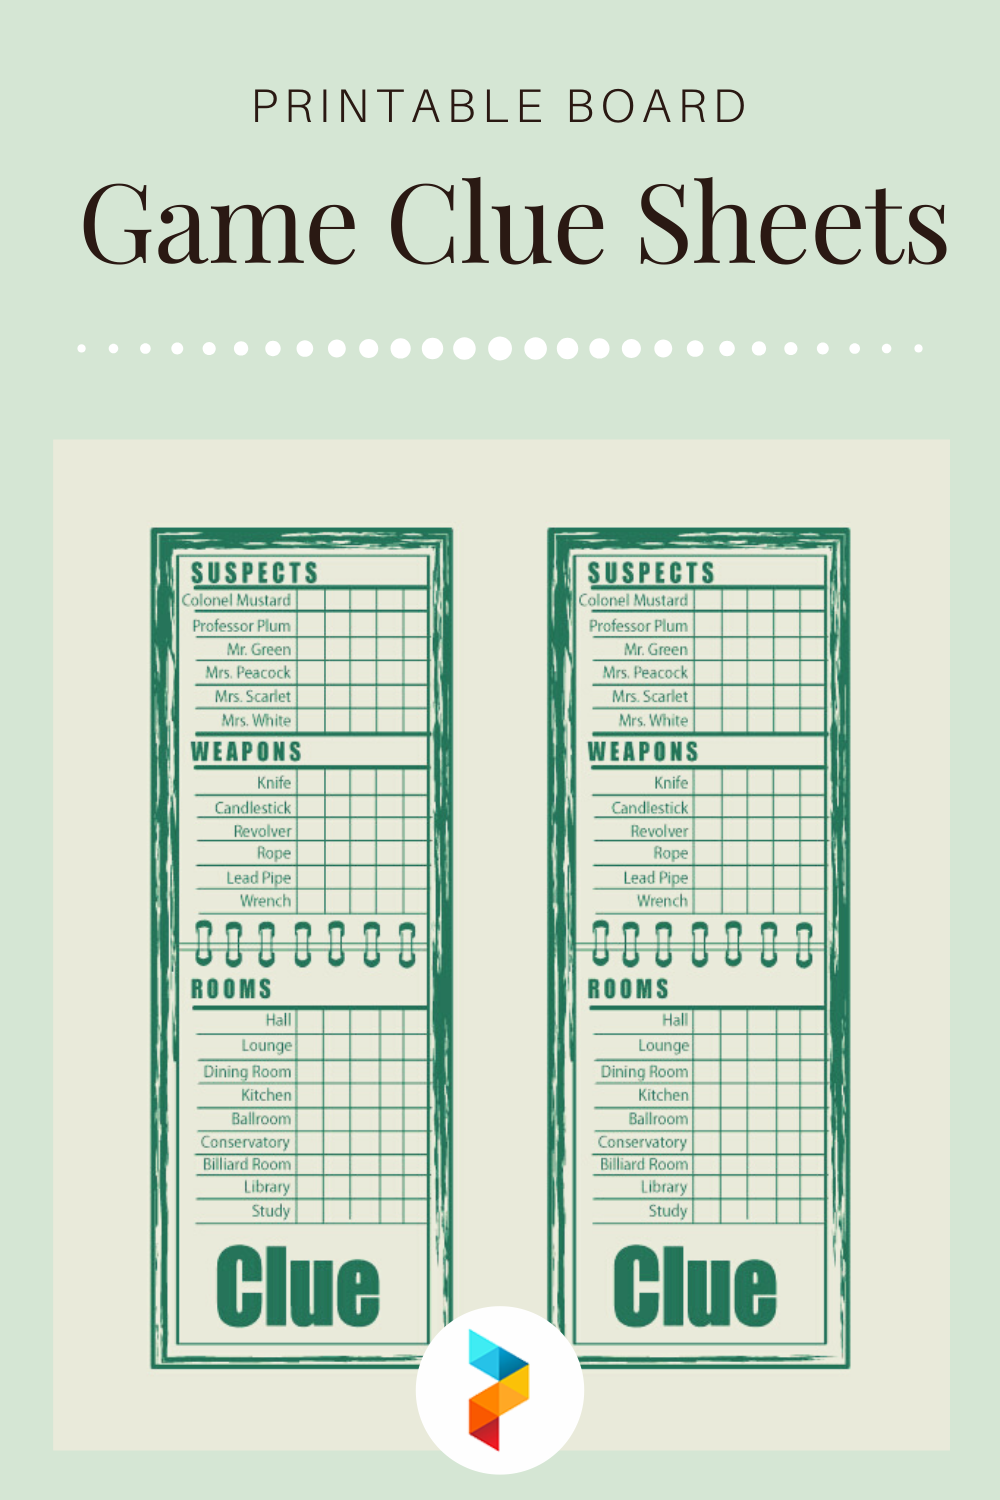 Printable Board Game Clue Sheets